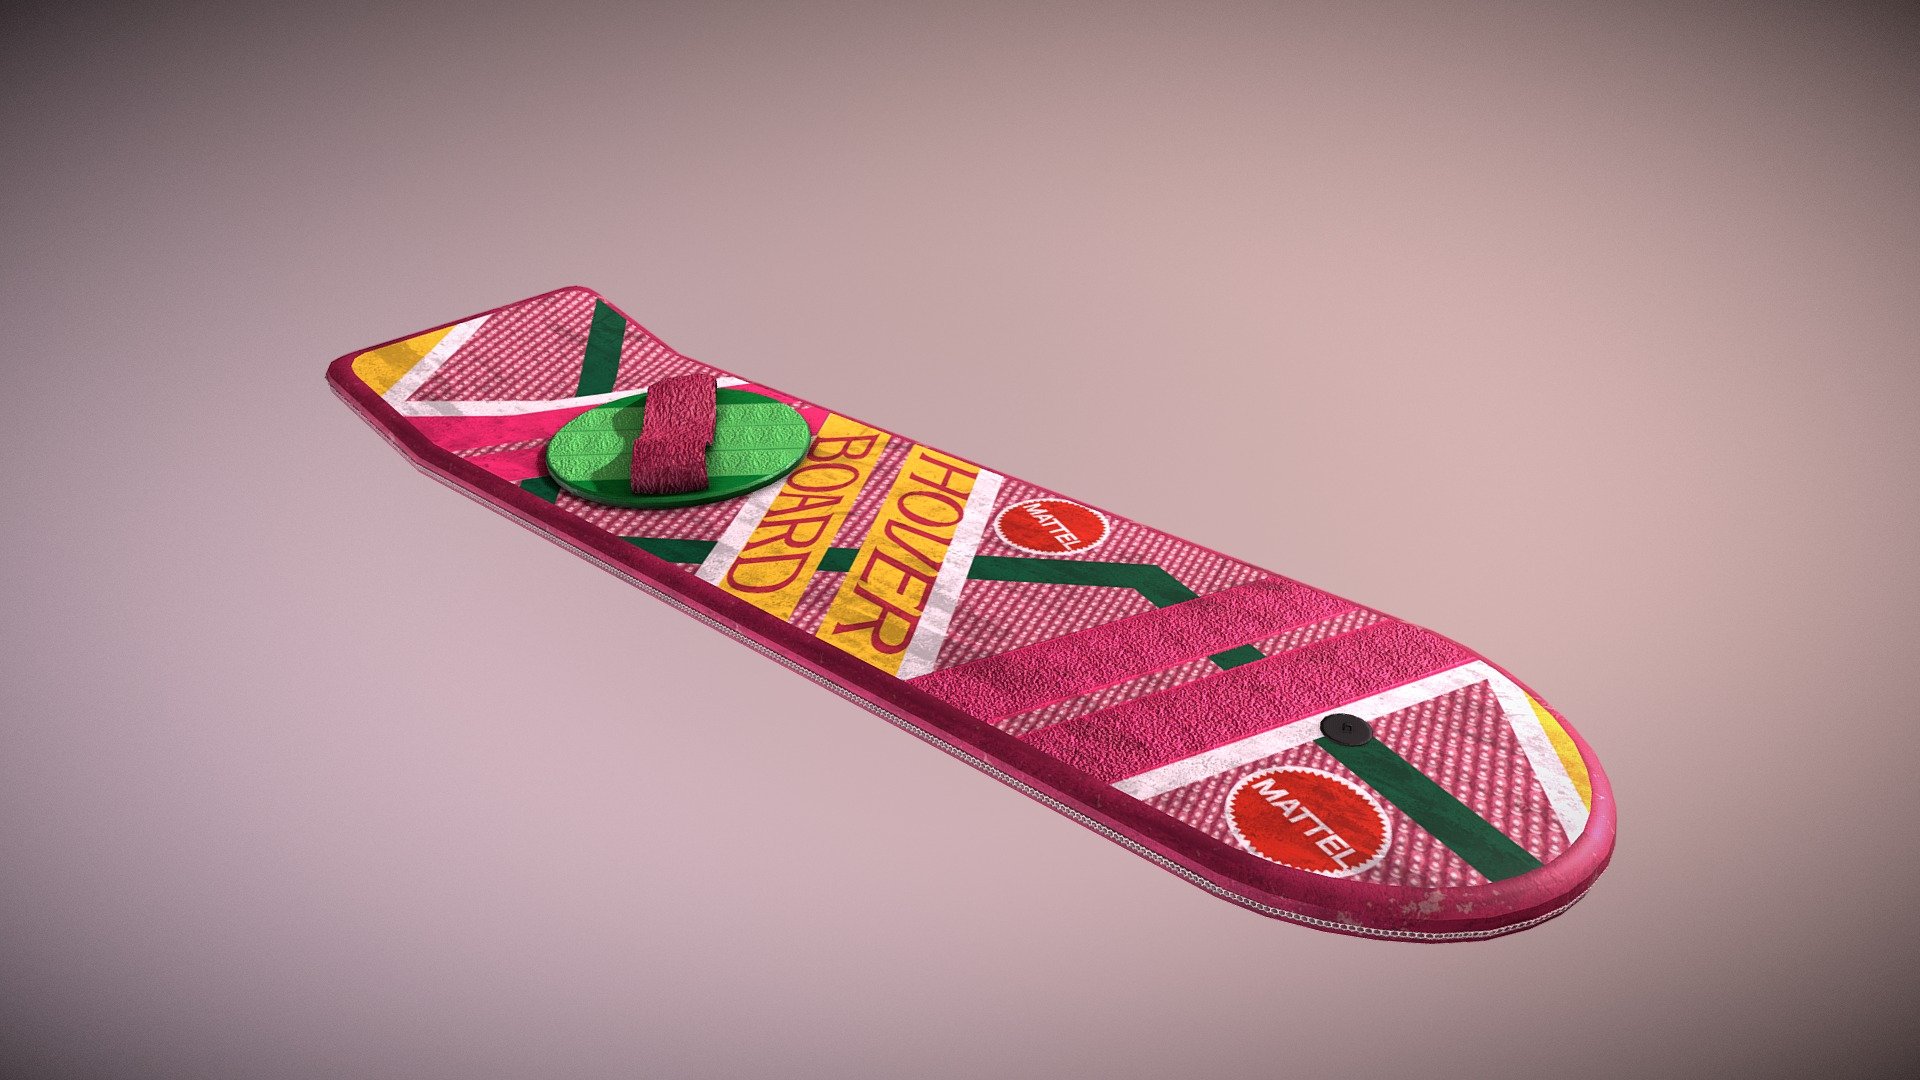 Hoverboard - Back To The Future